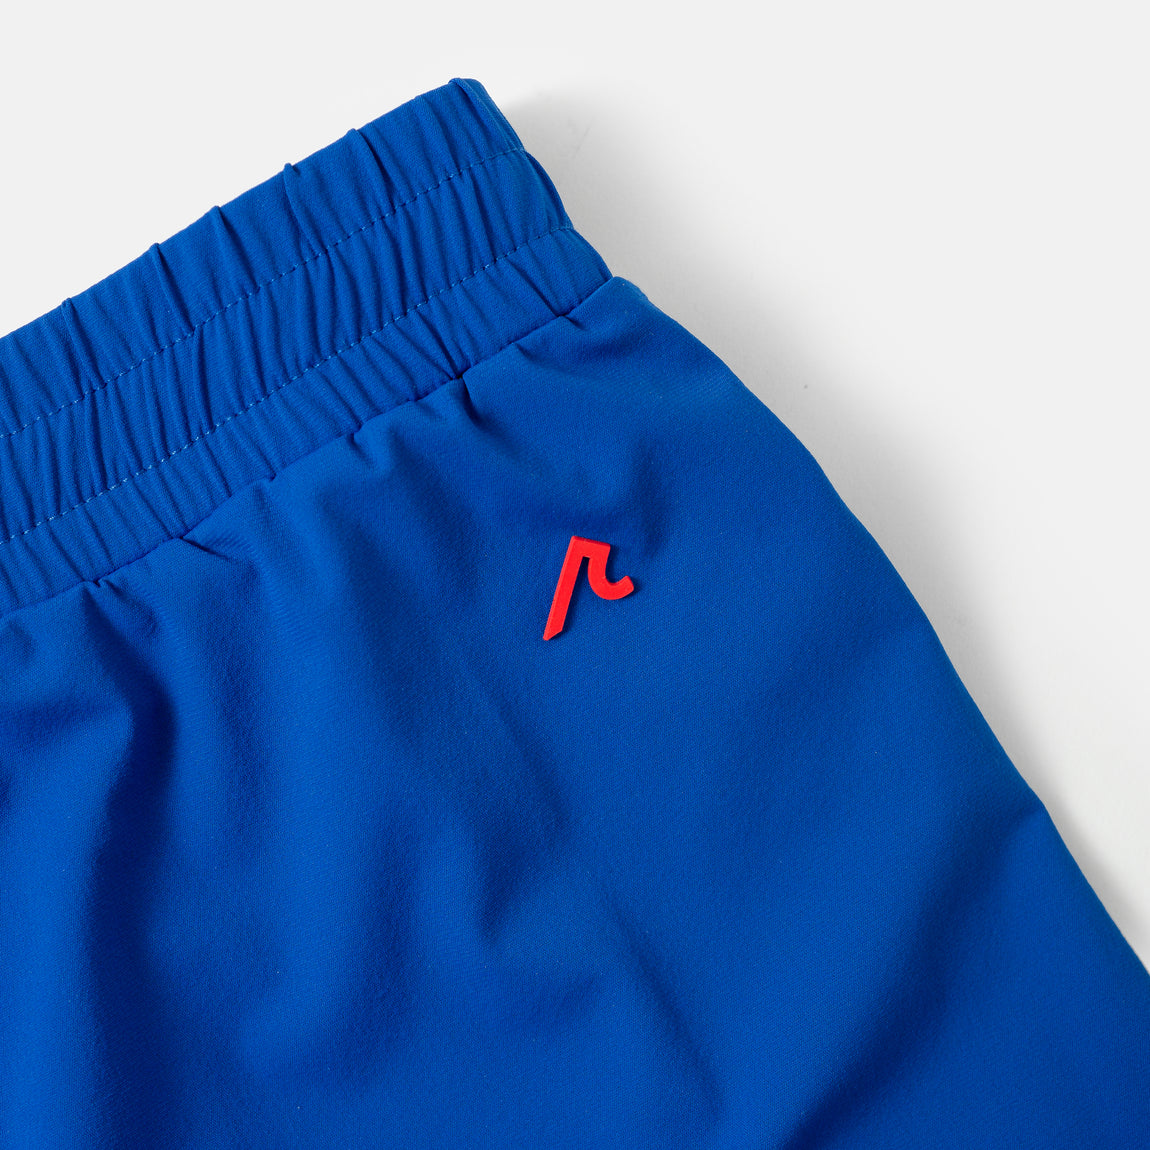 Centre X REDVANLY Parnell Tennis Short (Olympic Blue) - Centre X REDVANLY Parnell Tennis Short (Olympic Blue) - 